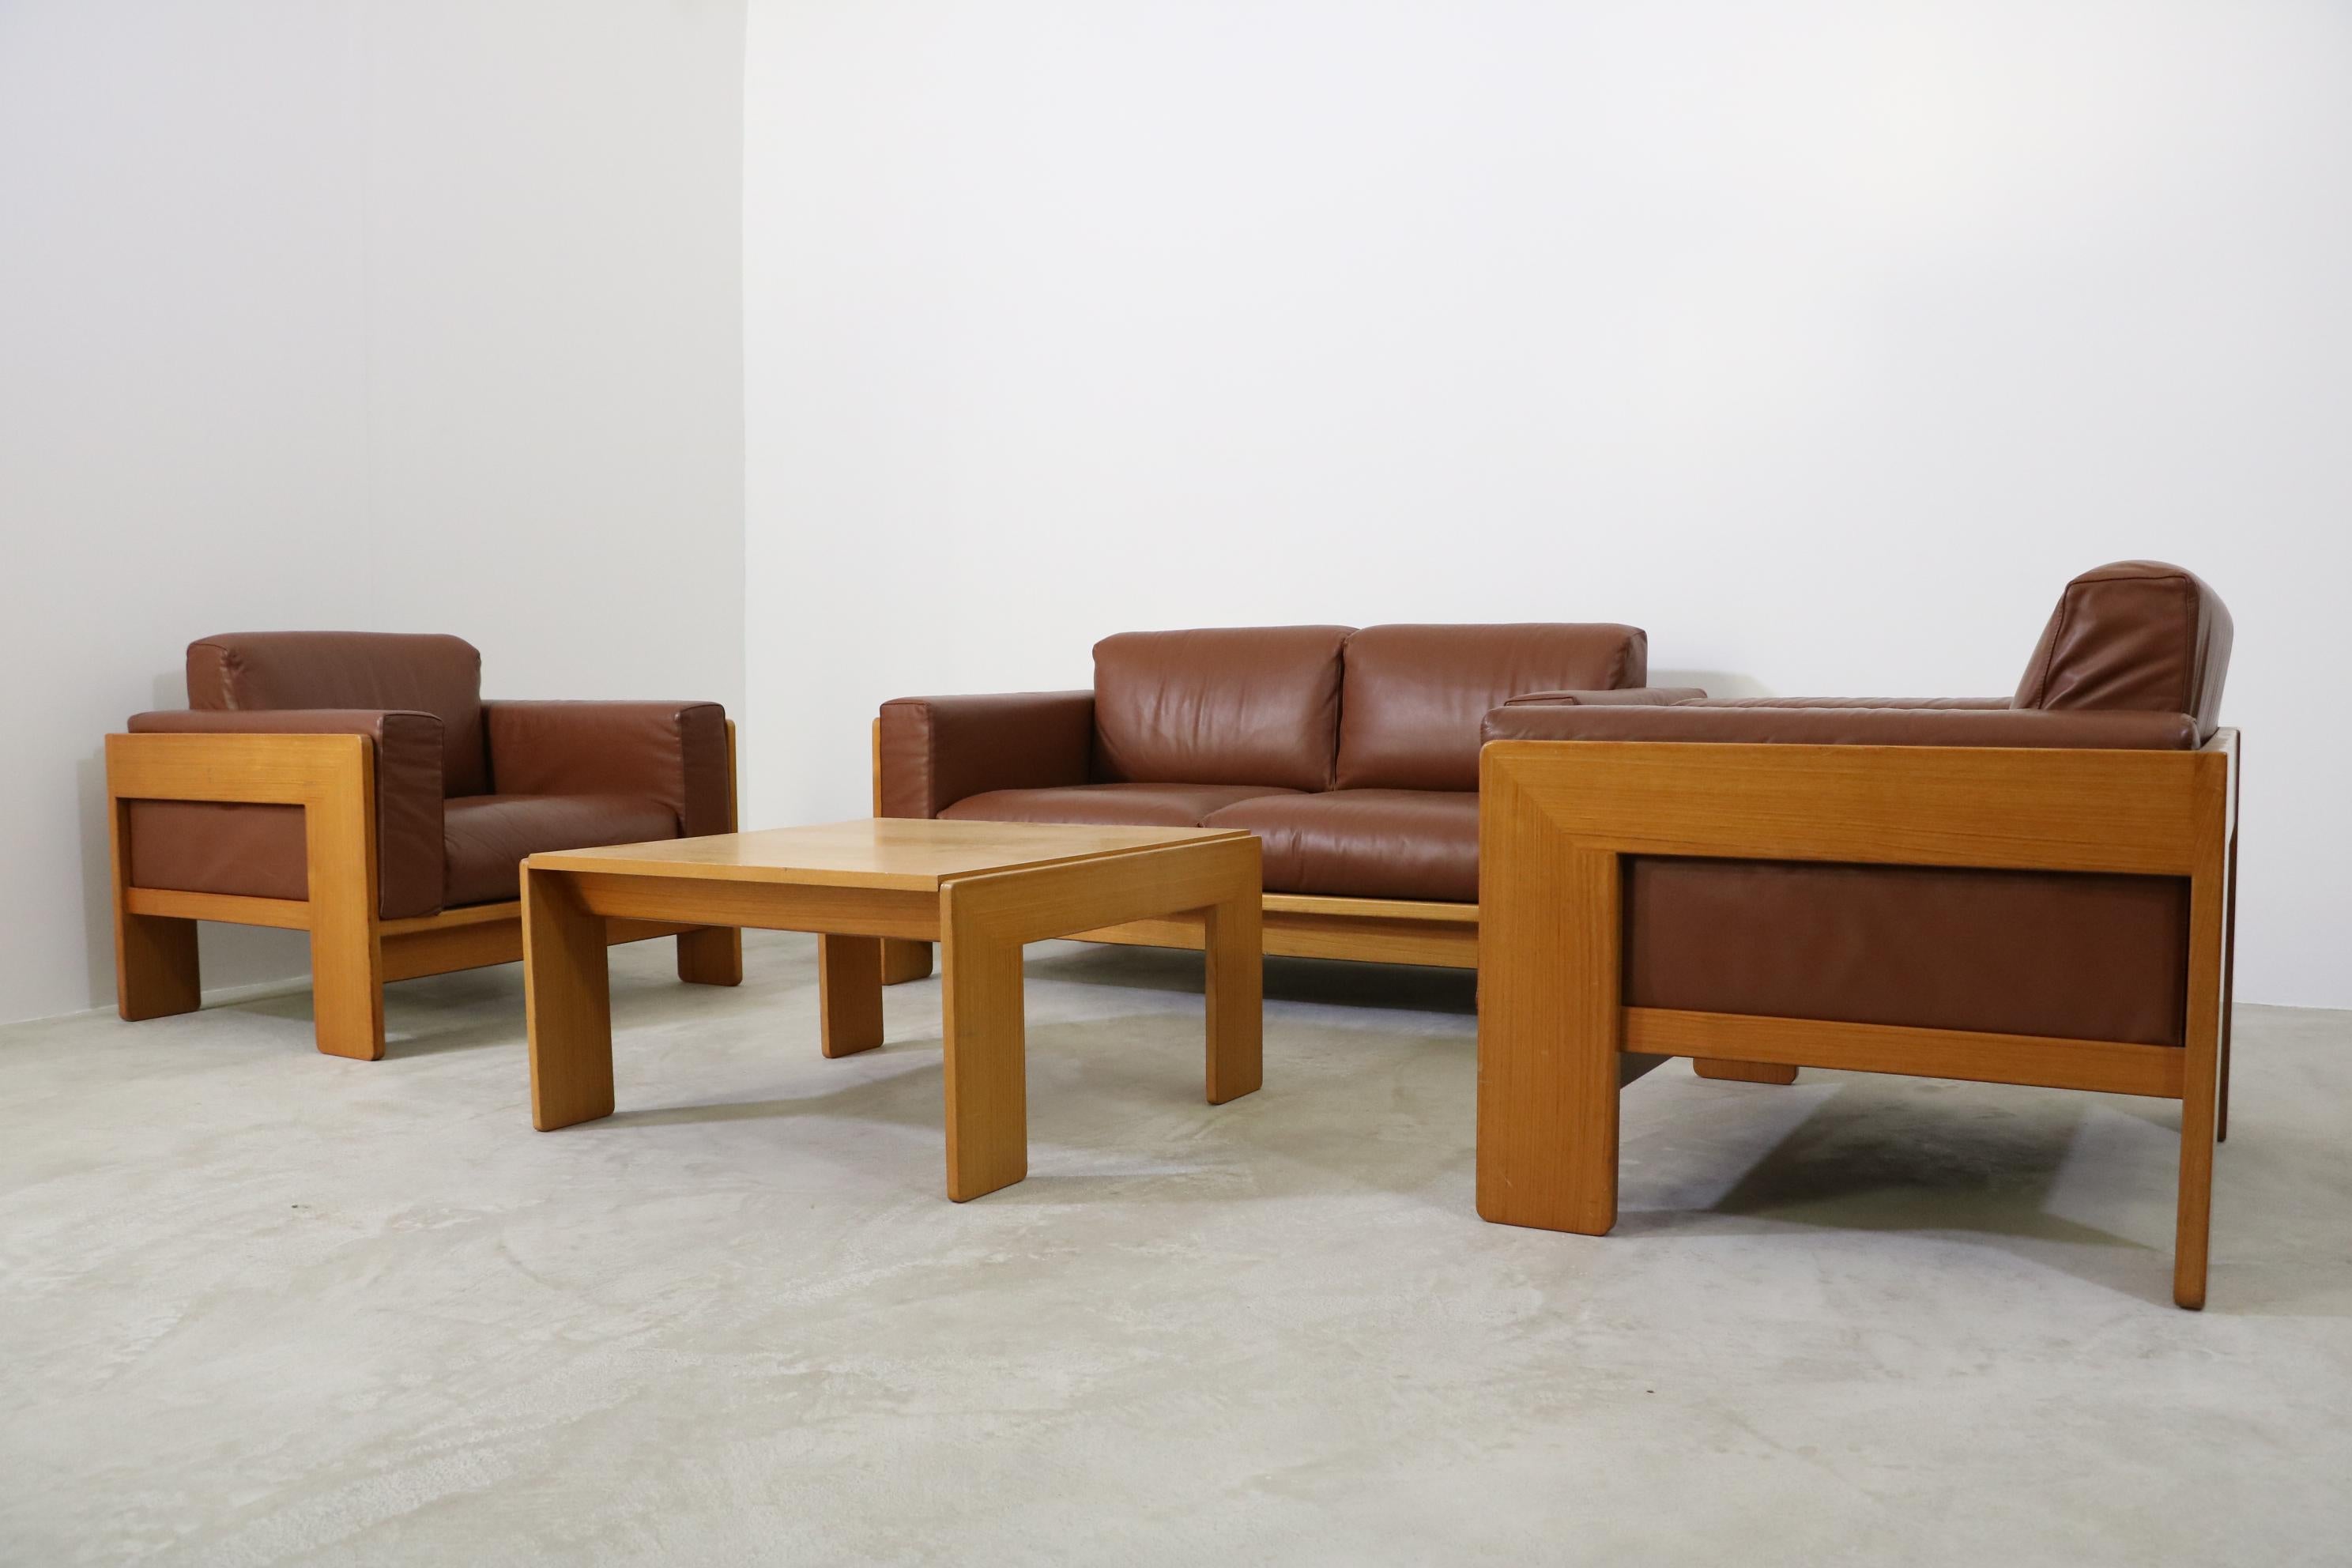 Knoll International armchairs model 'Bastiano' Tobia Scarpa leather cognac

A classic and chic chairs from the Bastiano series, designed by the iconic Italian designer duo Afra & Tobia Scarpa for Knoll, Italy, circa 1960

As an Italian architect and